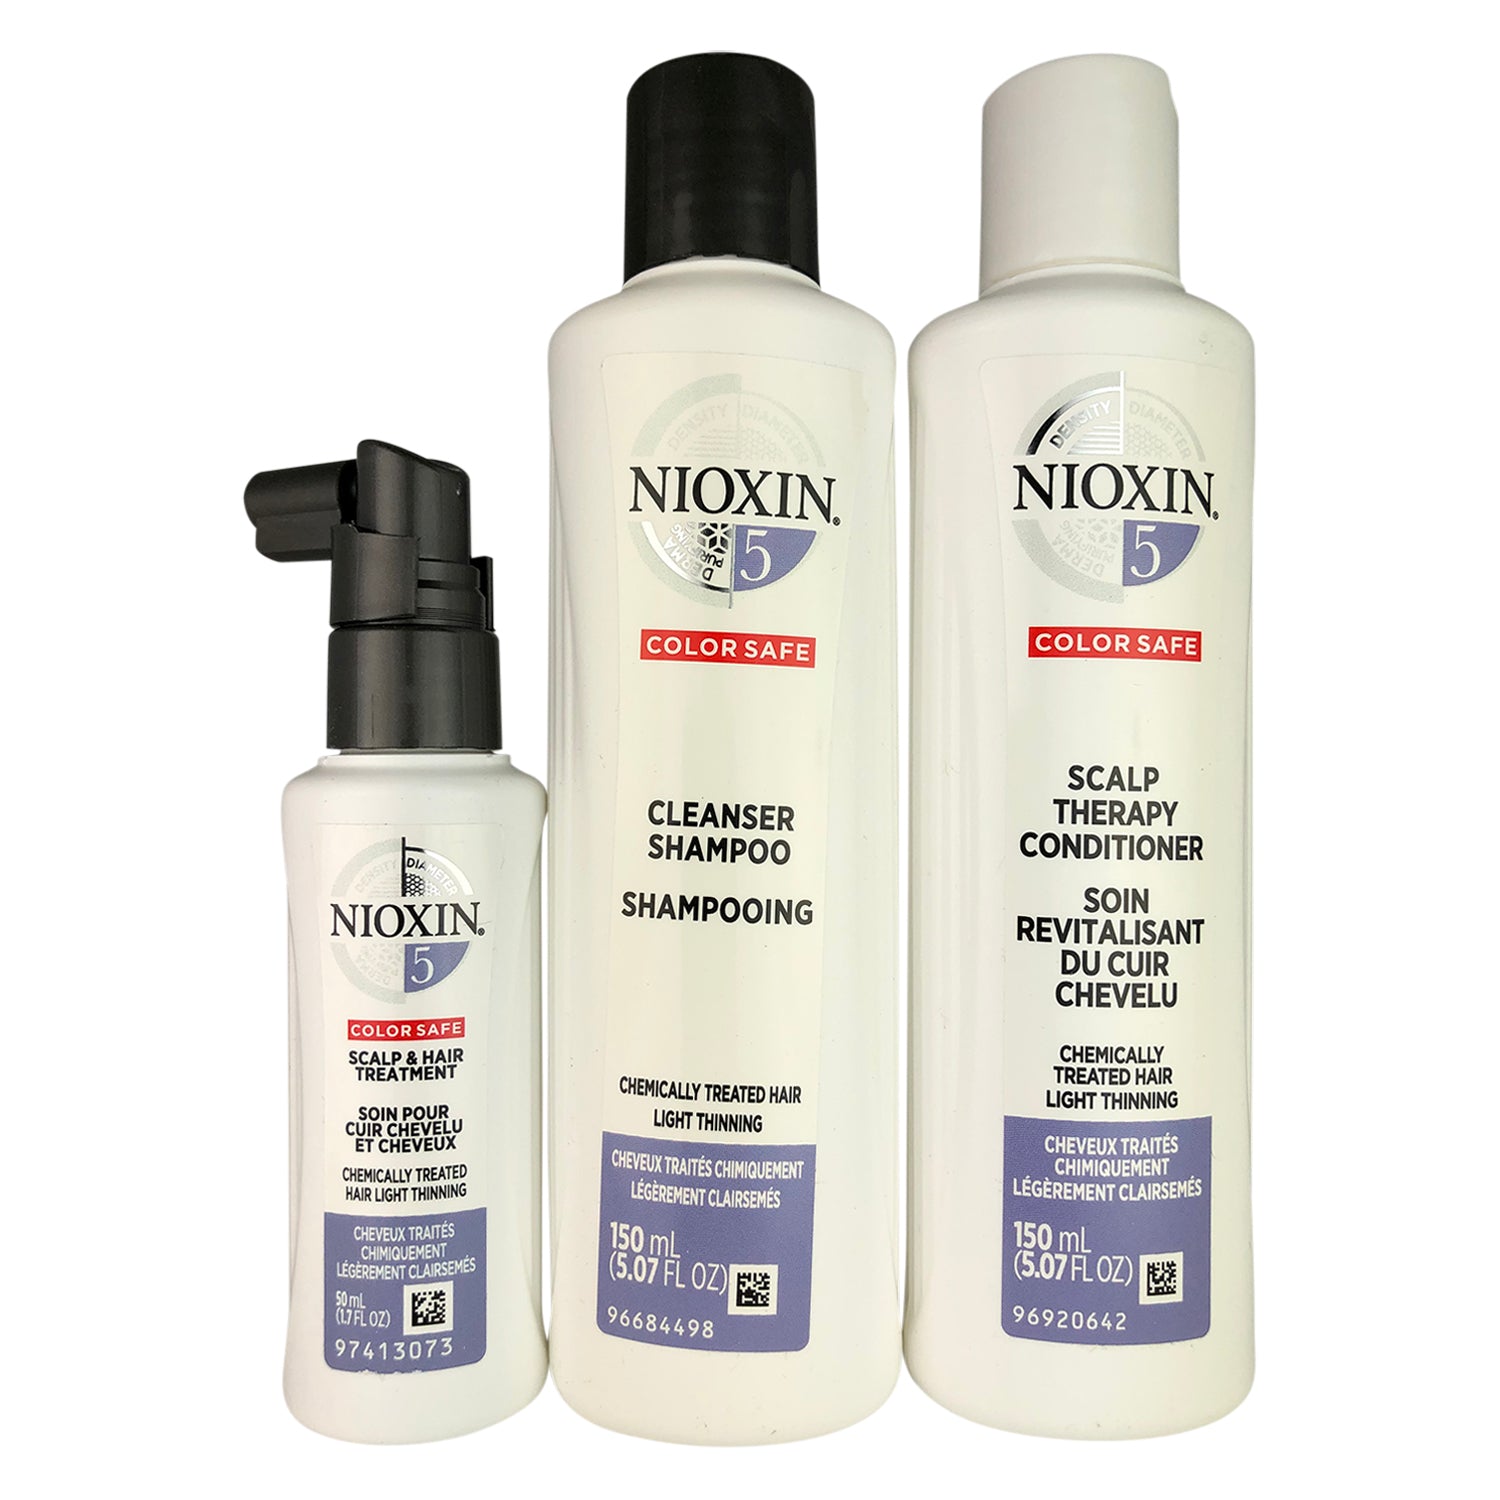 Nioxin System 5 Trial Kit (Cleanser Shampoo, Scalp Therapy Conditioner, Scalp & Hair Treatment)